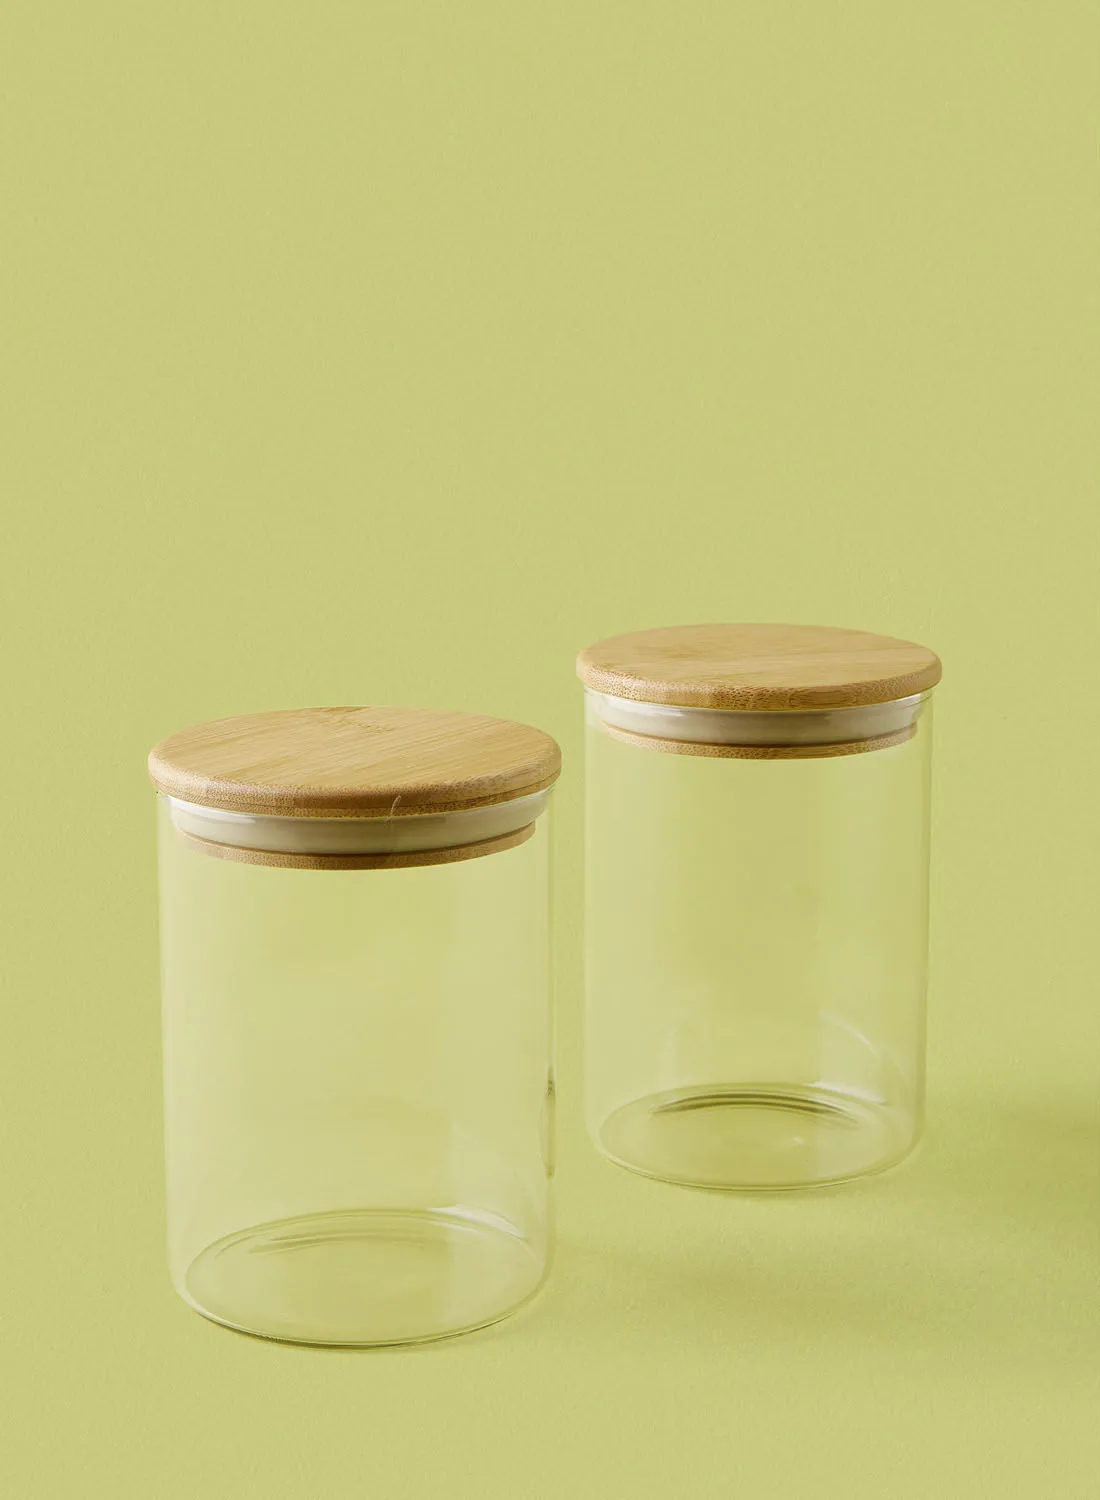 noon east 2 Piece Glass Food Storage Container Set - 700 ml Each - Airtight Bamboo Lids - Food Storage Box - Storage Boxes - Kitchen Cabinet Organizers - Glass Food Container - Clear